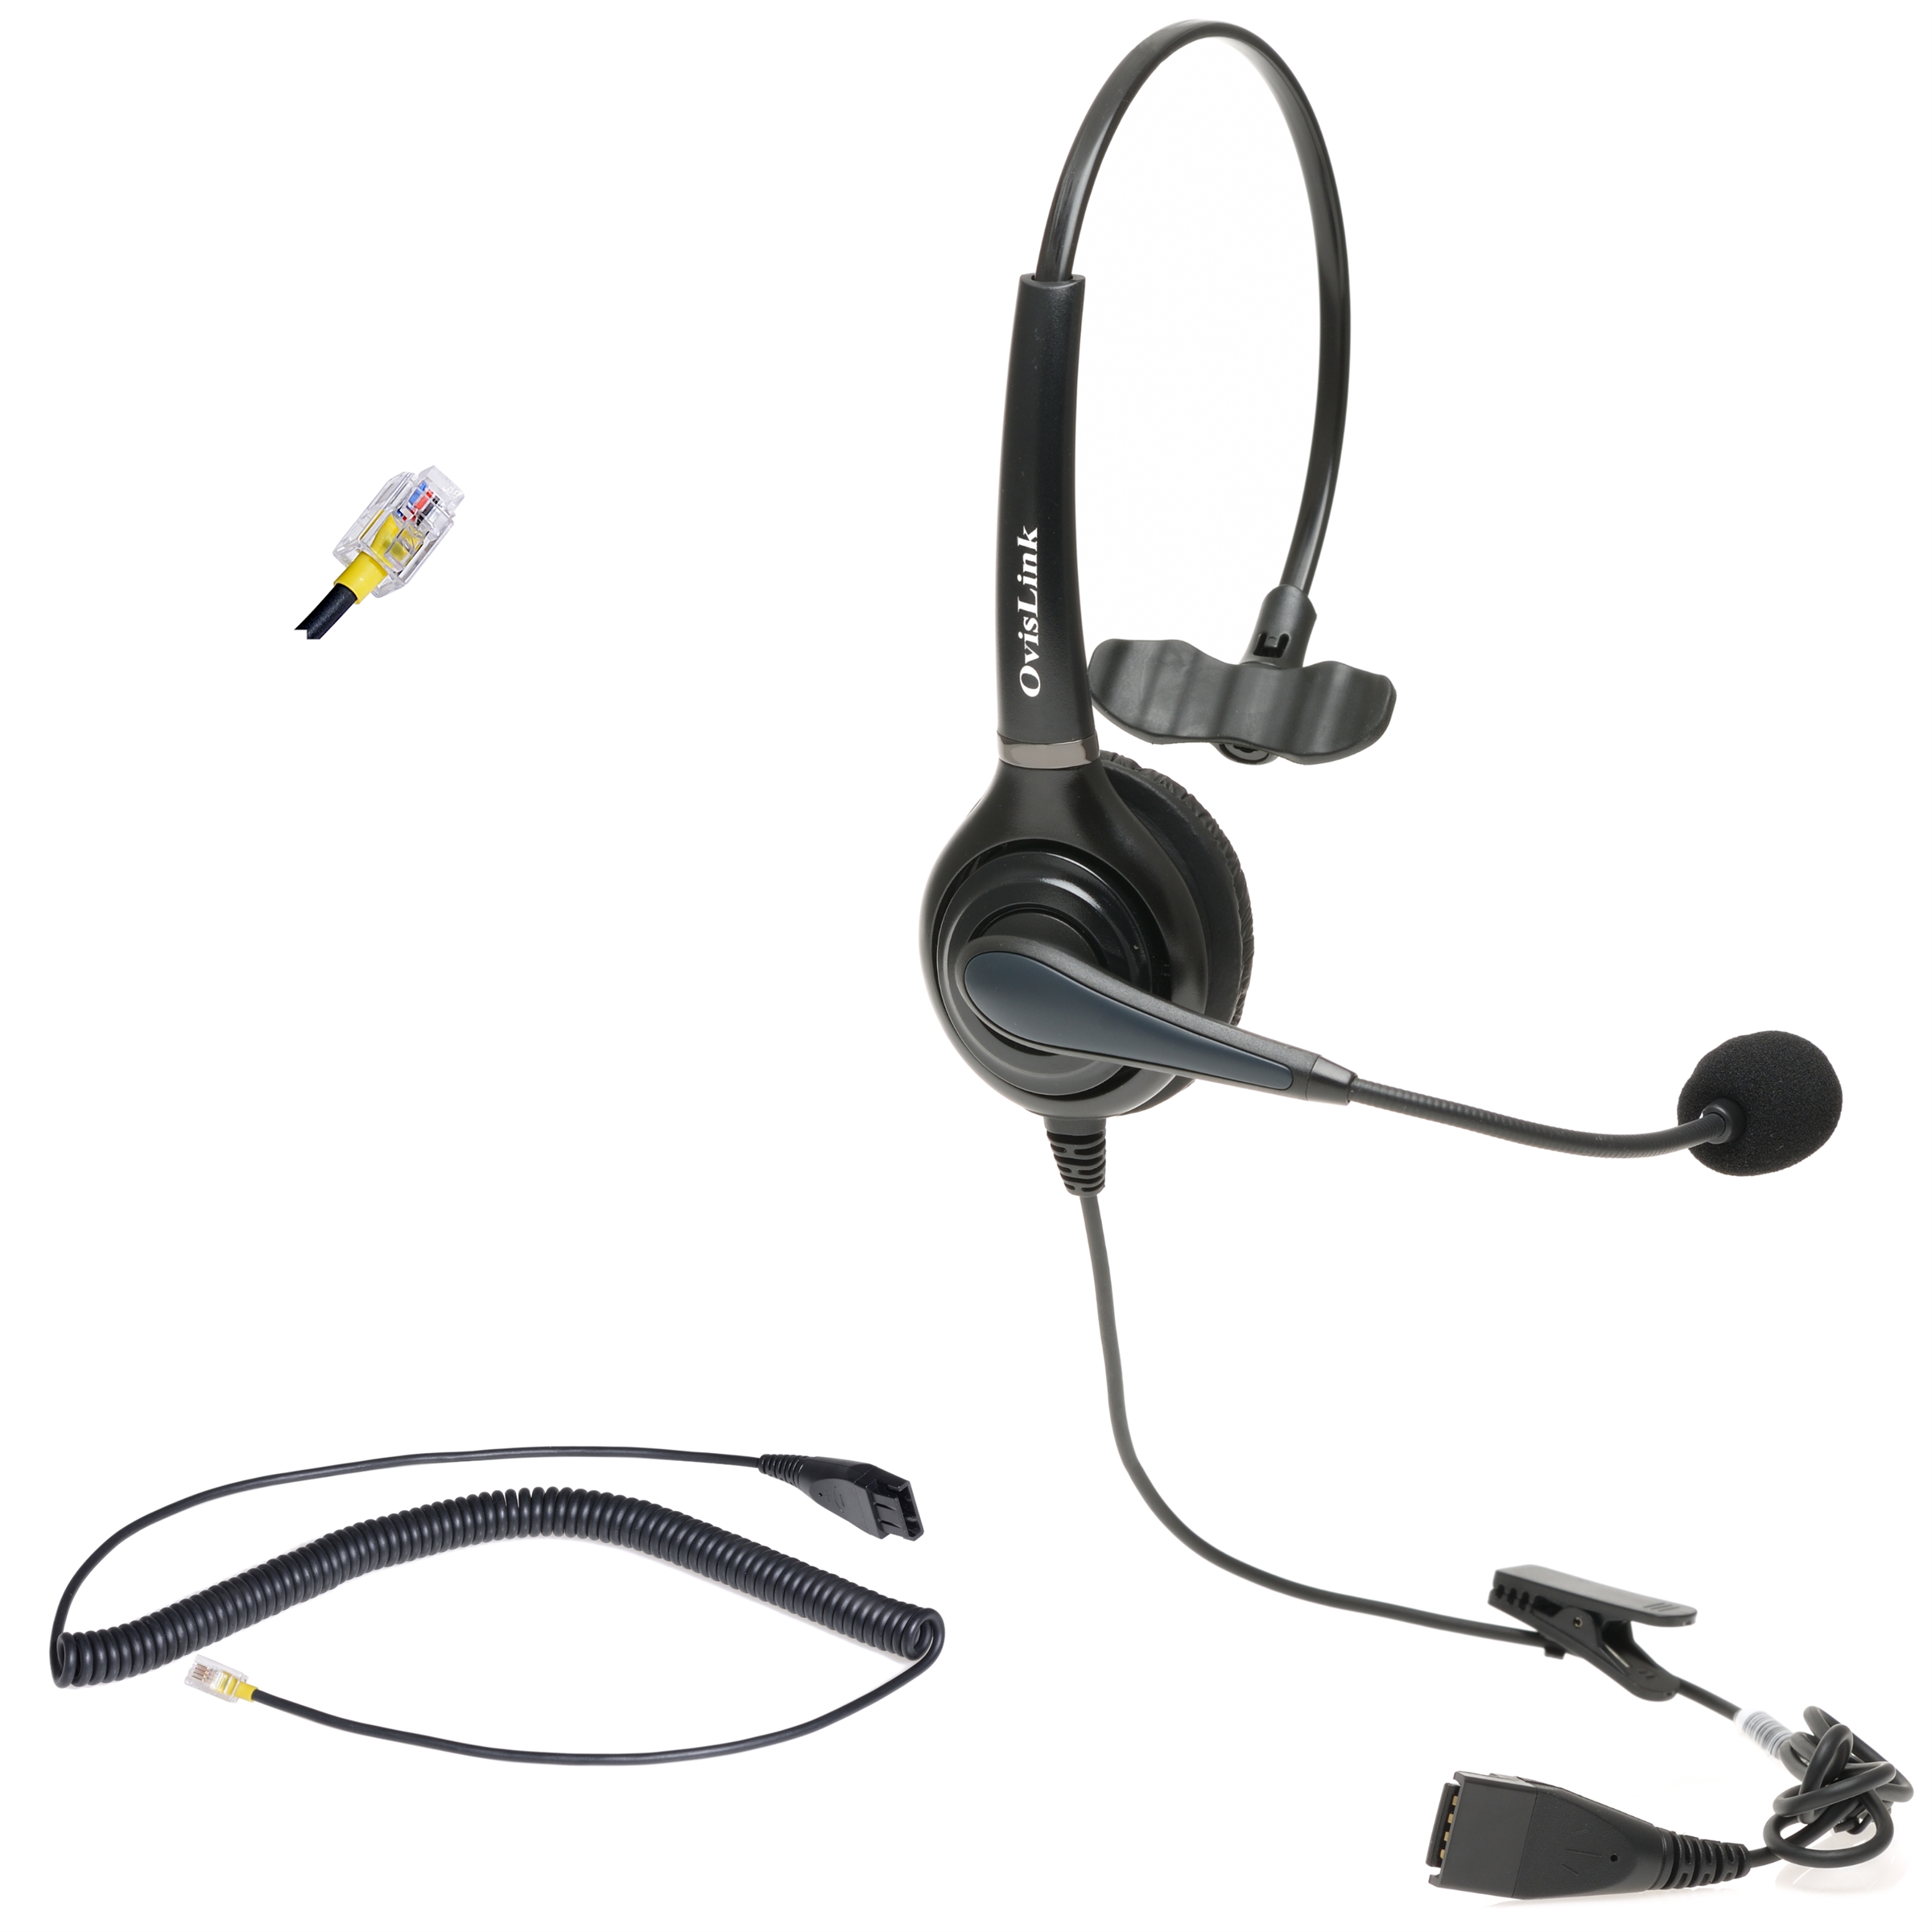 Cisco Unified Phone compatible Call Center headsets by With RJ9 Quick  Disconnect bottom cord. Noise canceling, HD voice, connect direct to Cisco  phone's headset jack. Lightweight and comfortable to wear for all